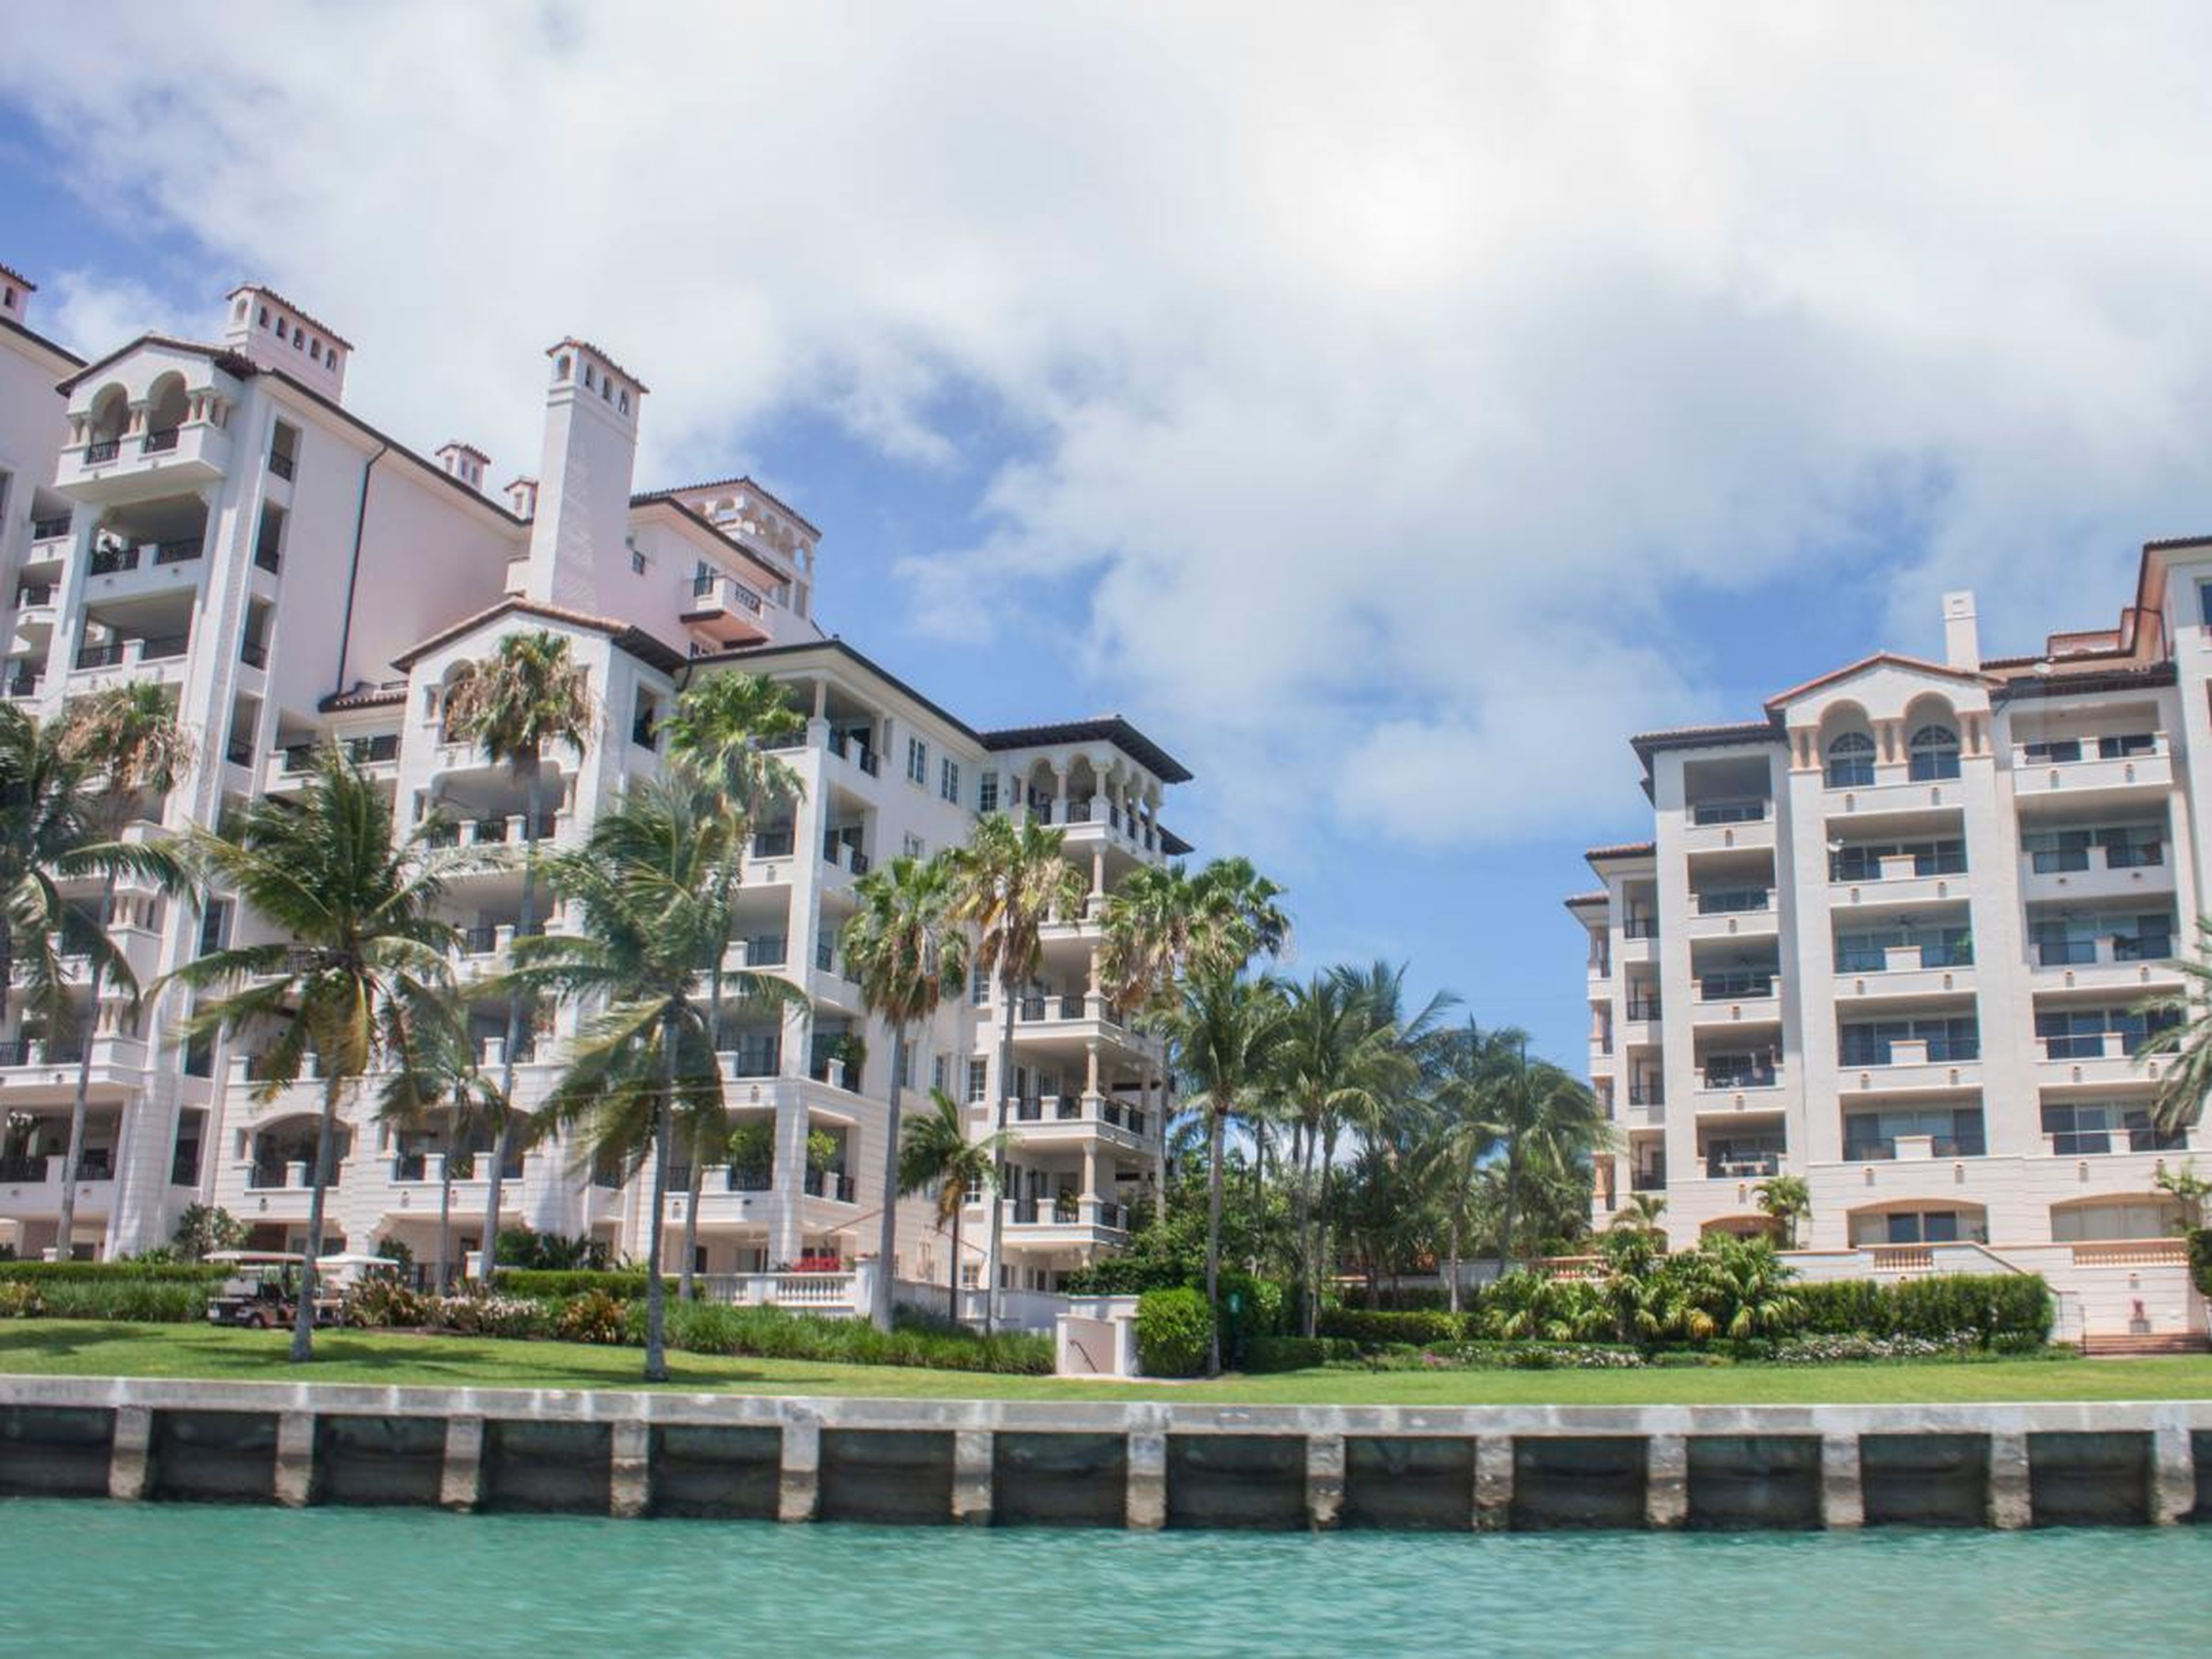 As we arrived at Fisher Island, I got my first look at the island's Mediterranean-style residential buildings.